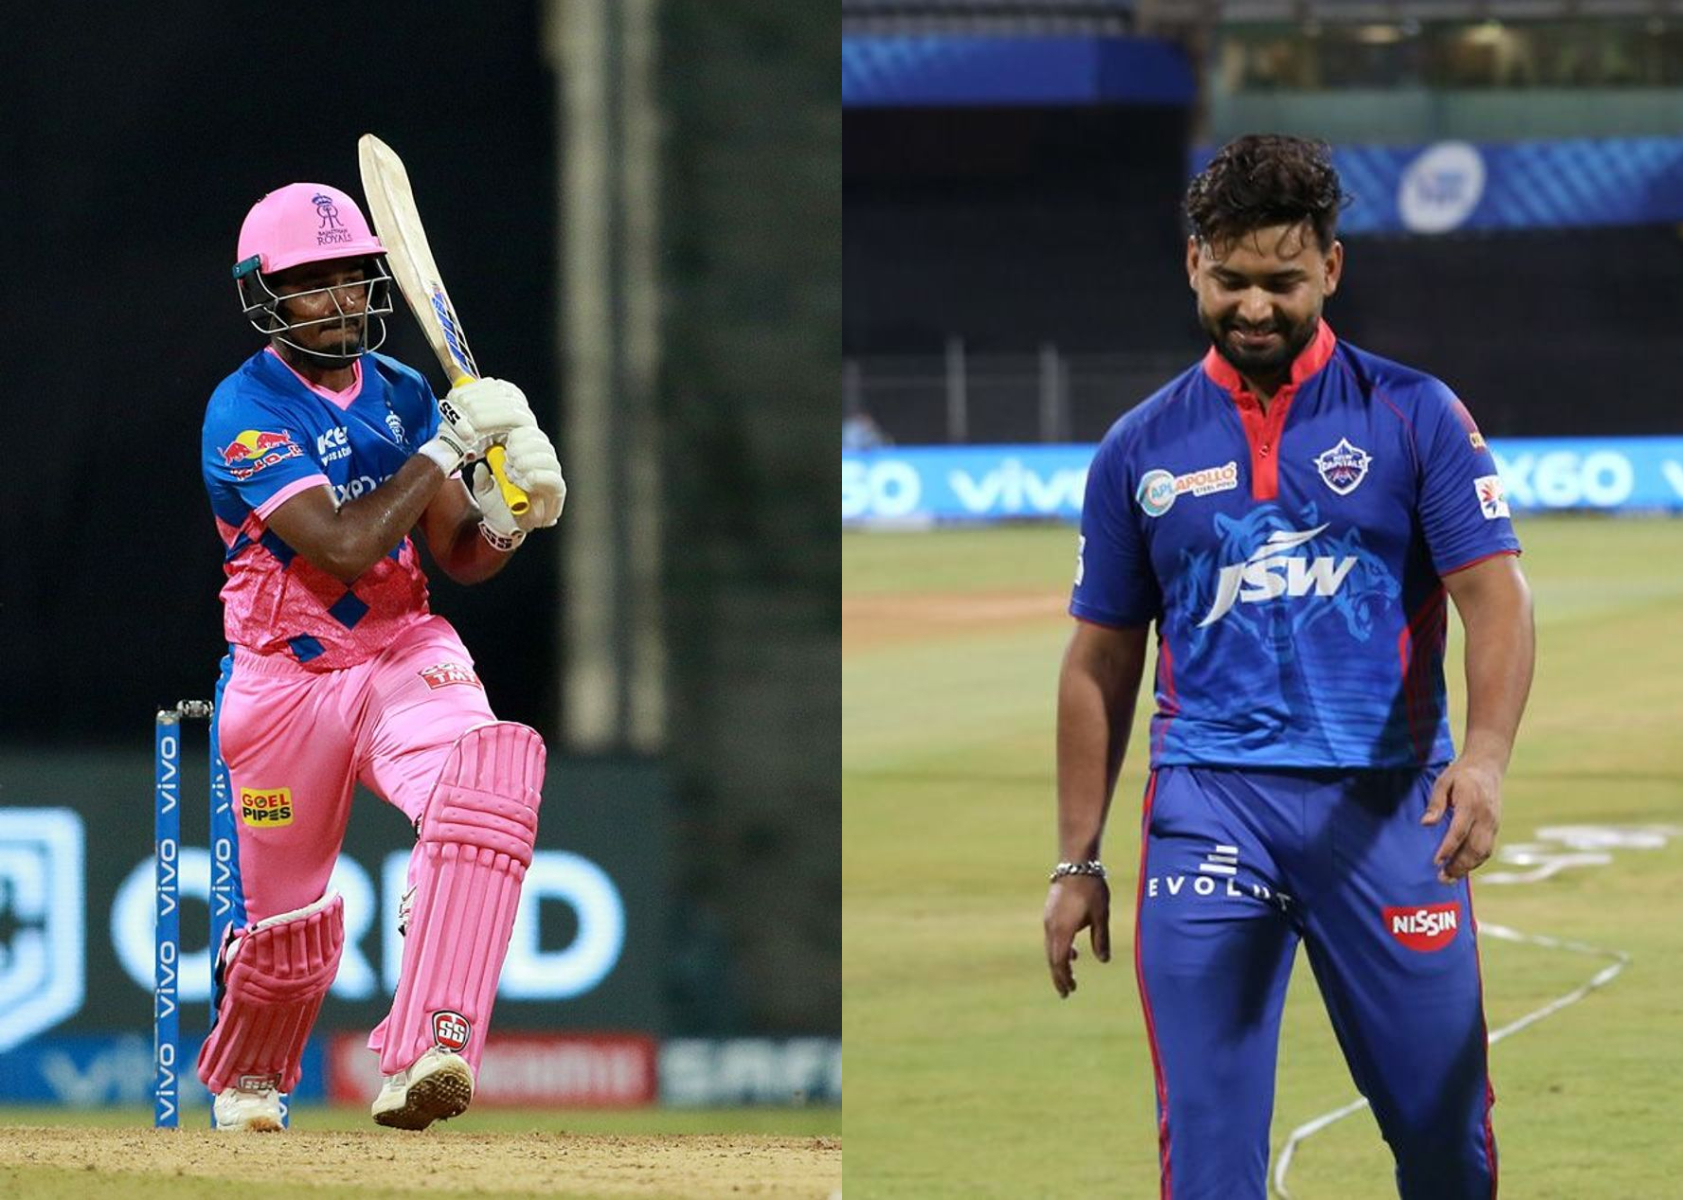 RR are looking for their first win of the IPL 2021, while DC will look to continue their winning form | IPL/BCCI